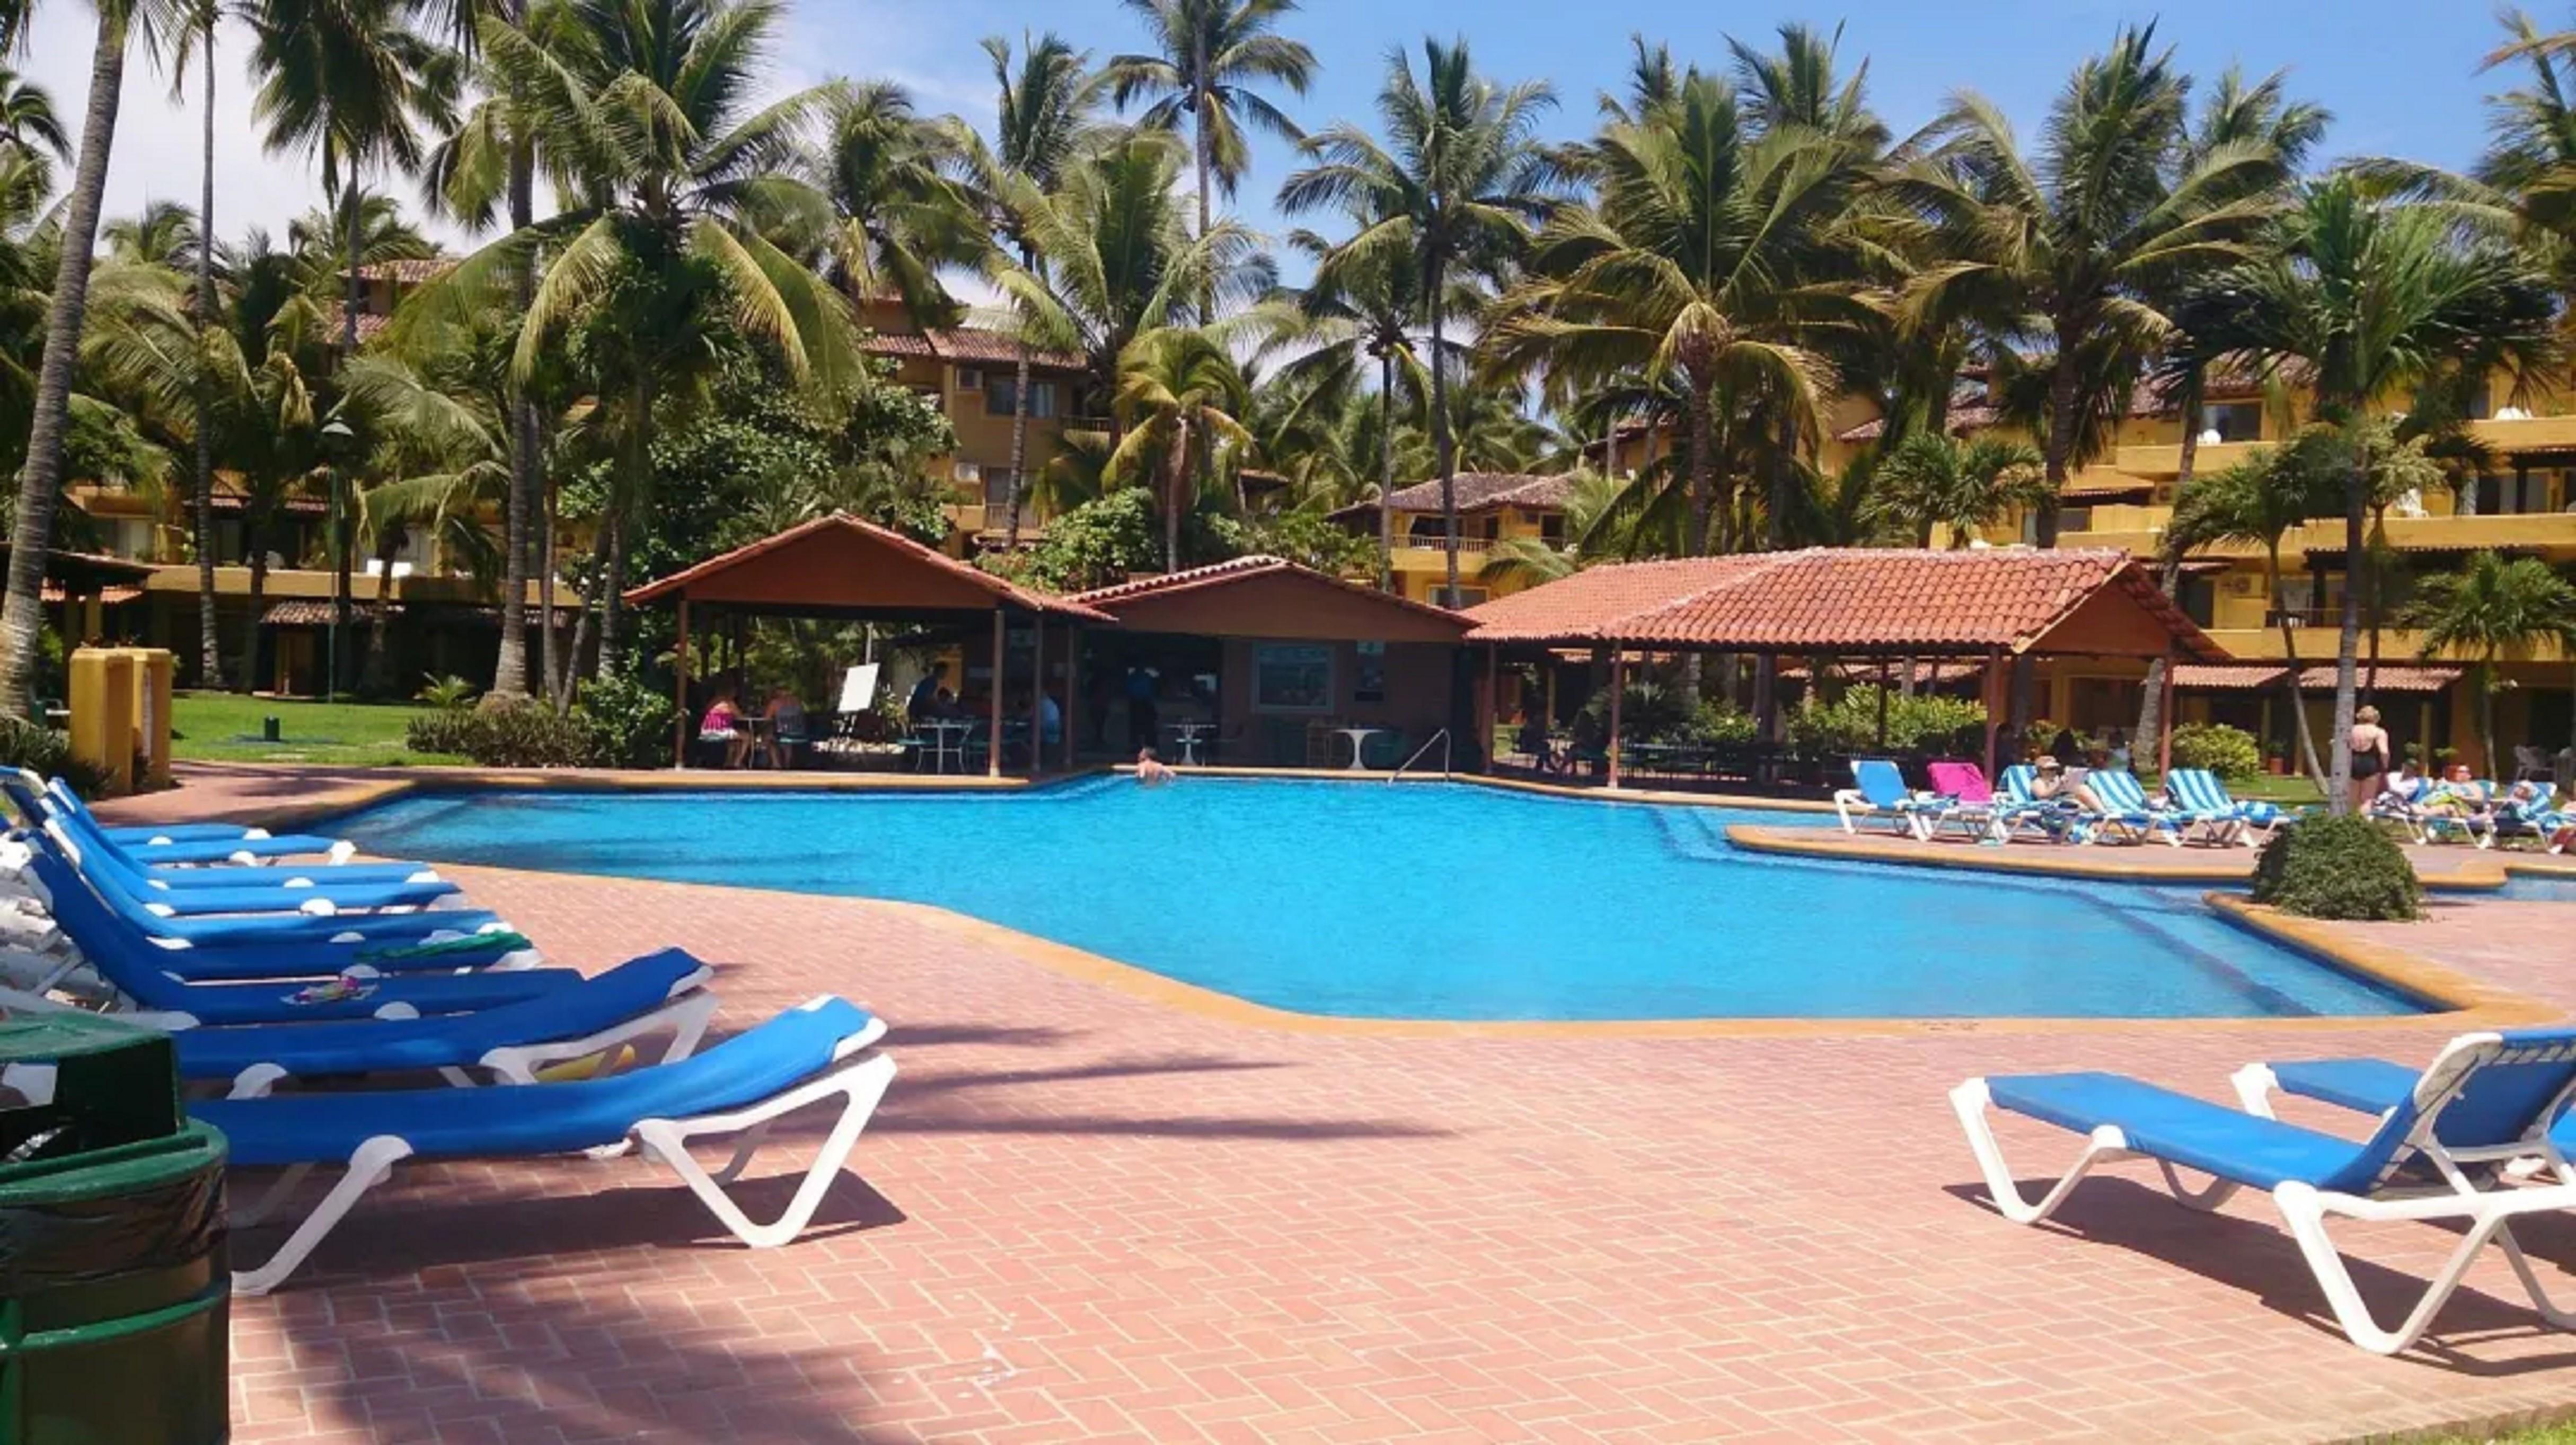 Vallarta Classic 1BR Condo w Pool Ideal for Tropical Vacations